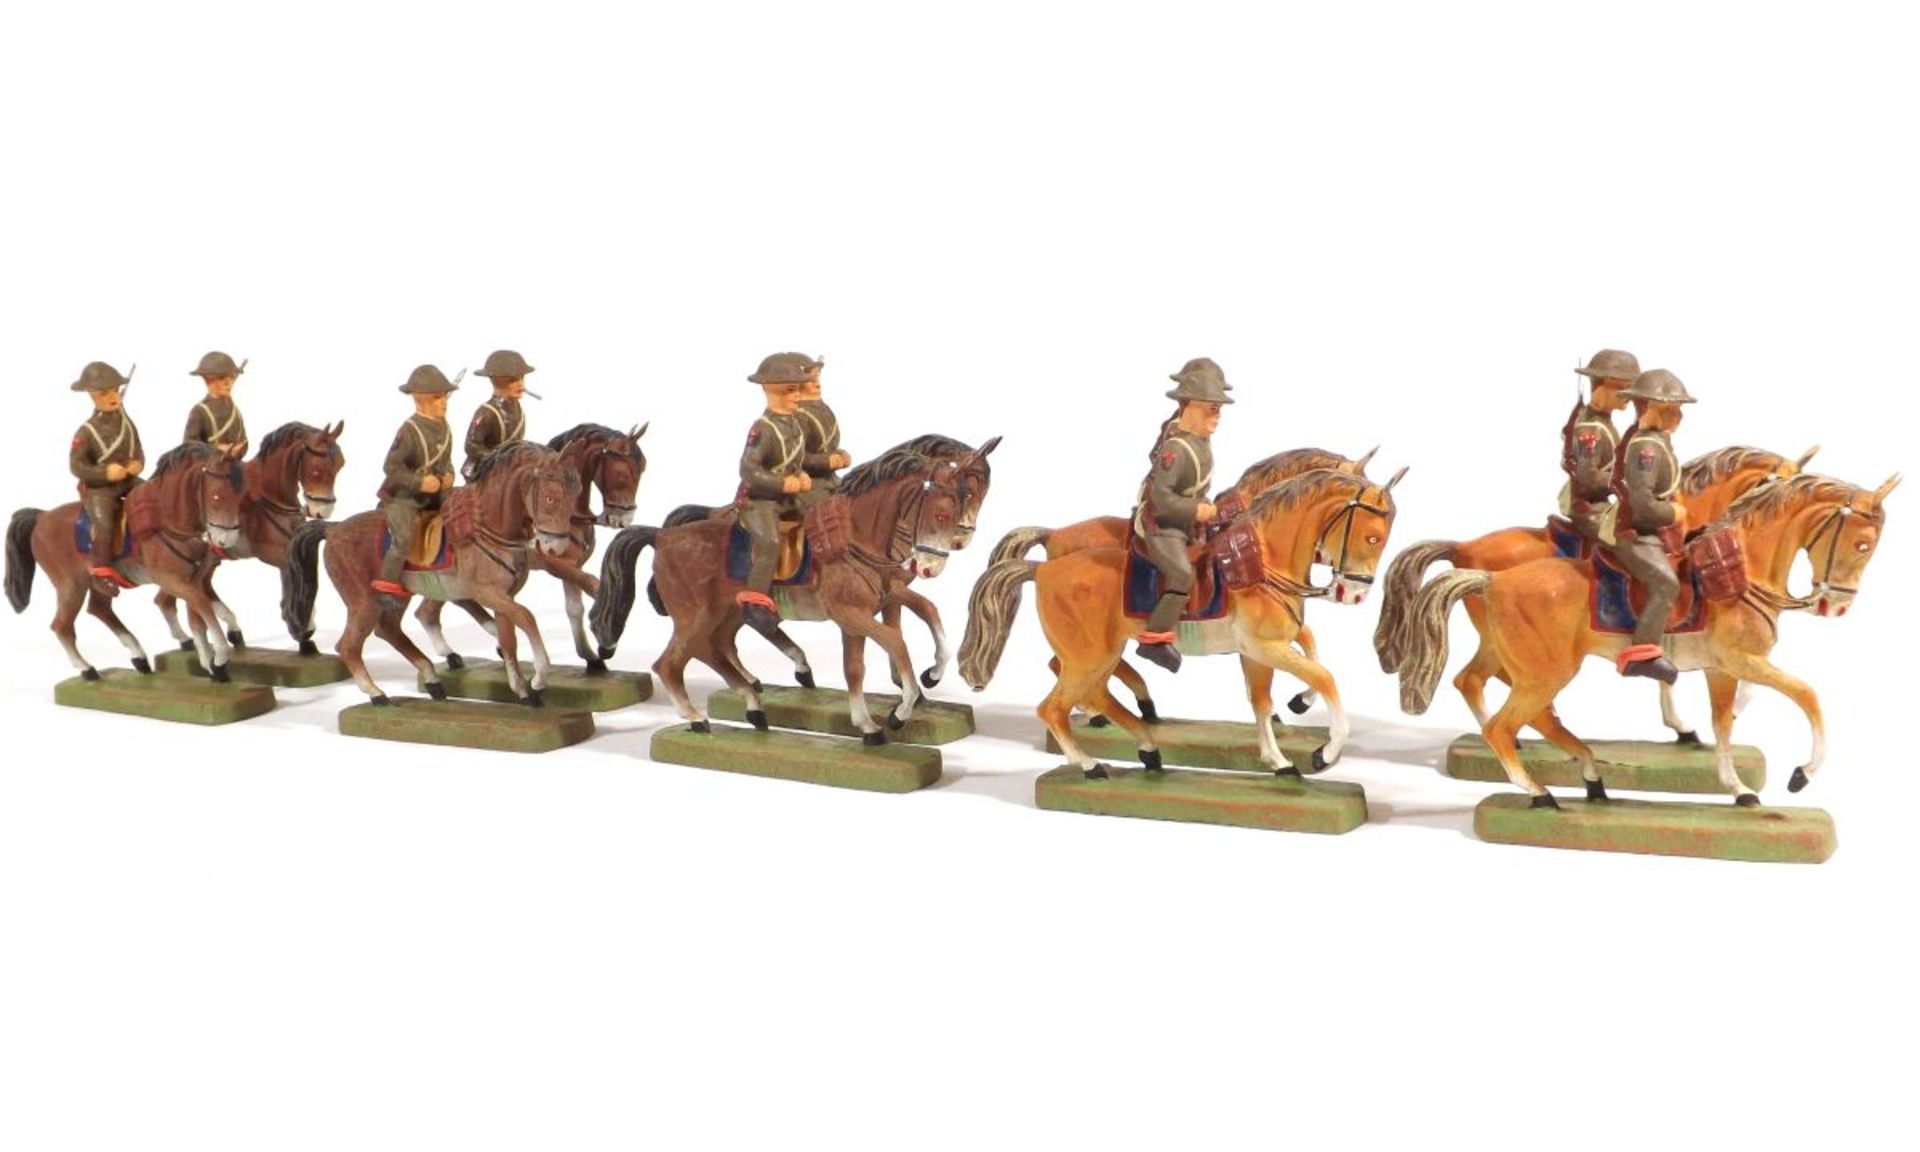 USA, cavalry, Lineol or Elastolin or others, composition figures, 7-7,5 cm size, made in Germany aft - Bild 2 aus 2